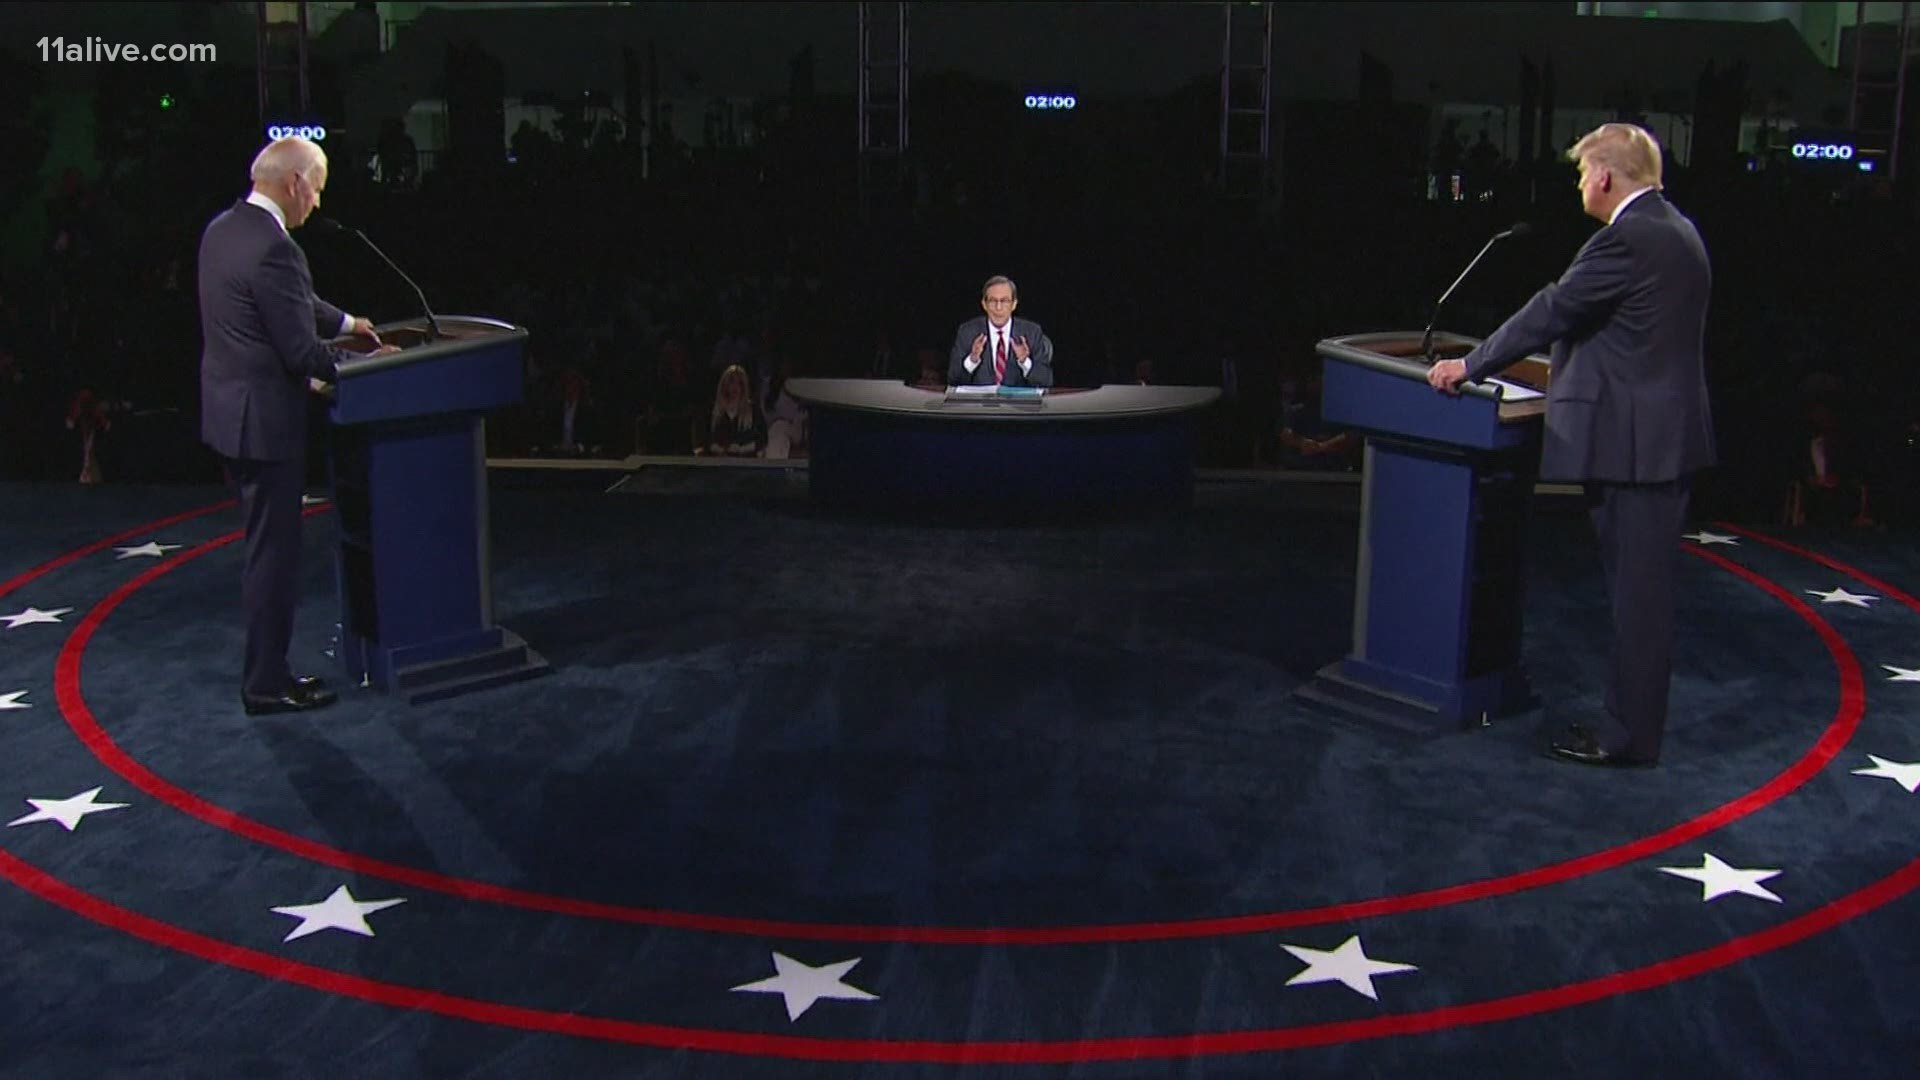 The moment from Tuesday night's debate is coming under scrut